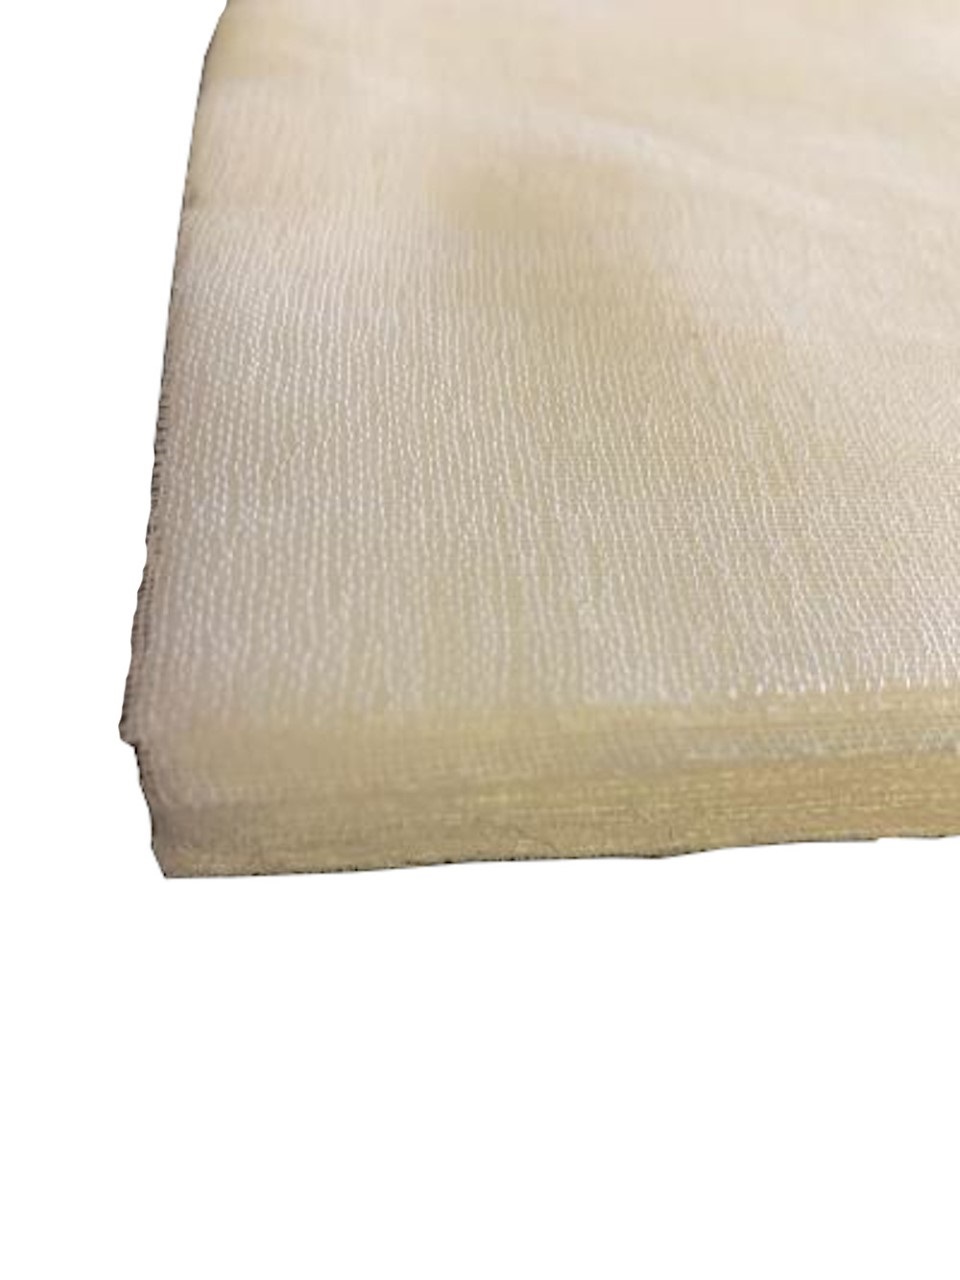 Grade 90 White Cheesecloth - 12" x 12" Squares (100 Pack)